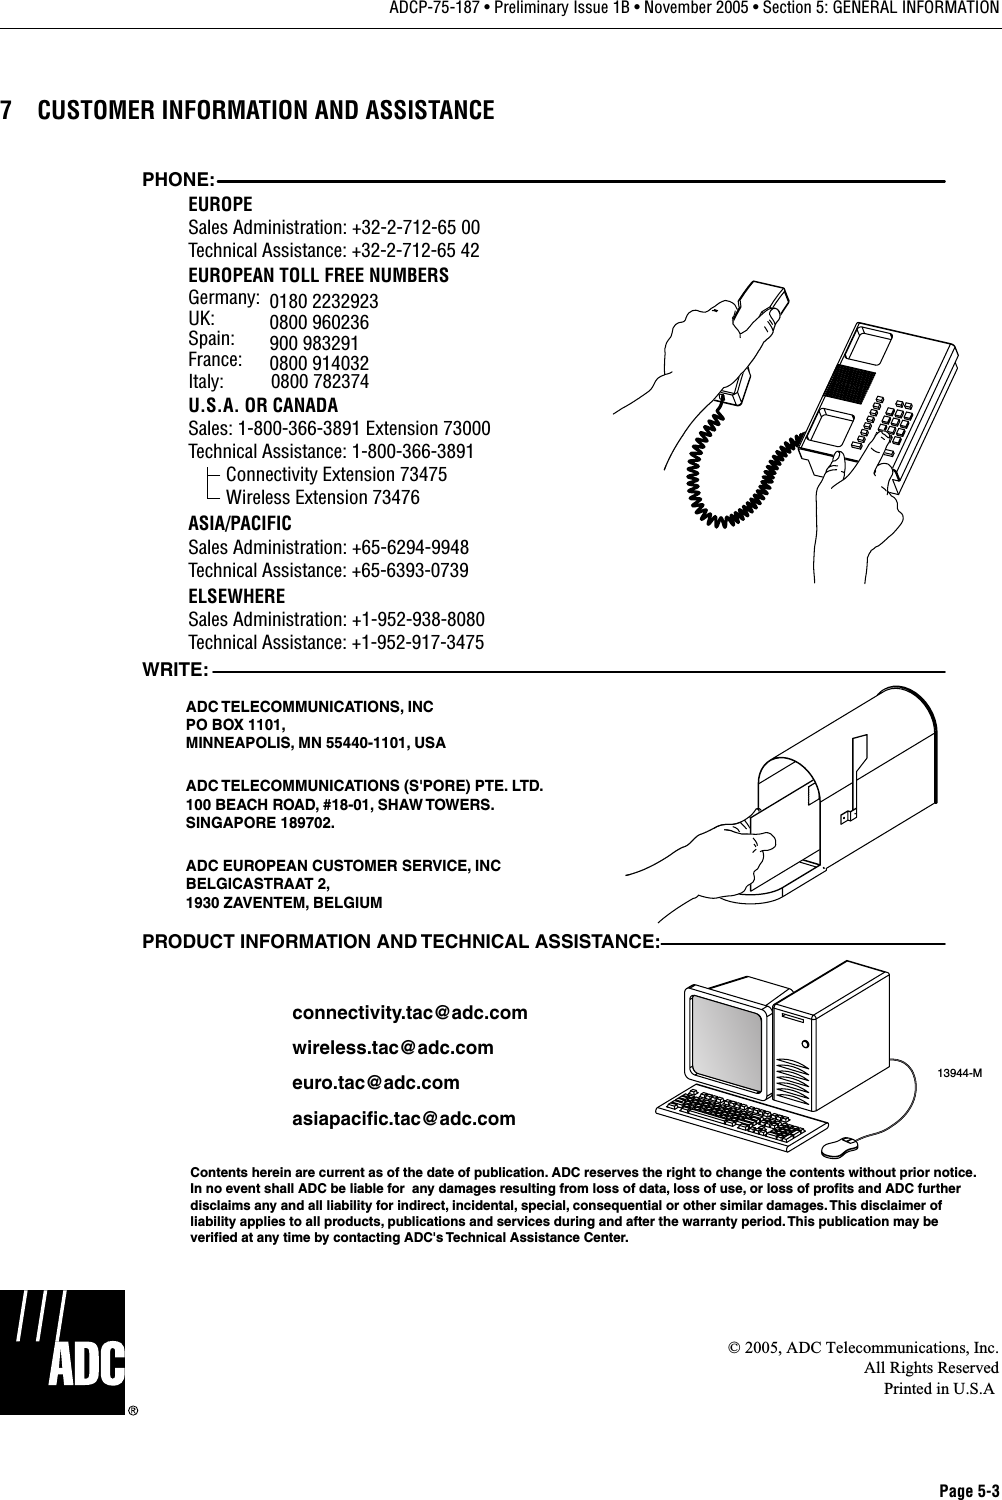 Page 5-3ADCP-75-187 • Preliminary Issue 1B • November 2005 • Section 5: GENERAL INFORMATION7 CUSTOMER INFORMATION AND ASSISTANCE© 2005, ADC Telecommunications, Inc.All Rights ReservedPrinted in U.S.A13944-MWRITE:ADC TELECOMMUNICATIONS, INCPO BOX 1101,MINNEAPOLIS, MN 55440-1101, USAADC TELECOMMUNICATIONS (S&apos;PORE) PTE. LTD.100 BEACH ROAD, #18-01, SHAW TOWERS.SINGAPORE 189702.ADC EUROPEAN CUSTOMER SERVICE, INCBELGICASTRAAT 2,1930 ZAVENTEM, BELGIUMPHONE:EUROPESales Administration: +32-2-712-65 00Technical Assistance: +32-2-712-65 42EUROPEAN TOLL FREE NUMBERSUK: 0800 960236Spain: 900 983291France: 0800 914032Germany: 0180 2232923U.S.A. OR CANADASales: 1-800-366-3891 Extension 73000Technical Assistance: 1-800-366-3891        Connectivity Extension 73475        Wireless Extension 73476ASIA/PACIFICSales Administration: +65-6294-9948Technical Assistance: +65-6393-0739ELSEWHERESales Administration: +1-952-938-8080Technical Assistance: +1-952-917-3475Italy:          0800 782374PRODUCT INFORMATION AND TECHNICAL ASSISTANCE:Contents herein are current as of the date of publication. ADC reserves the right to change the contents without prior notice.In no event shall ADC be liable for  any damages resulting from loss of data, loss of use, or loss of profits and ADC furtherdisclaims any and all liability for indirect, incidental, special, consequential or other similar damages. This disclaimer ofliability applies to all products, publications and services during and after the warranty period. This publication may beverified at any time by contacting ADC&apos;s Technical Assistance Center. euro.tac@adc.comasiapacific.tac@adc.comwireless.tac@adc.comconnectivity.tac@adc.com